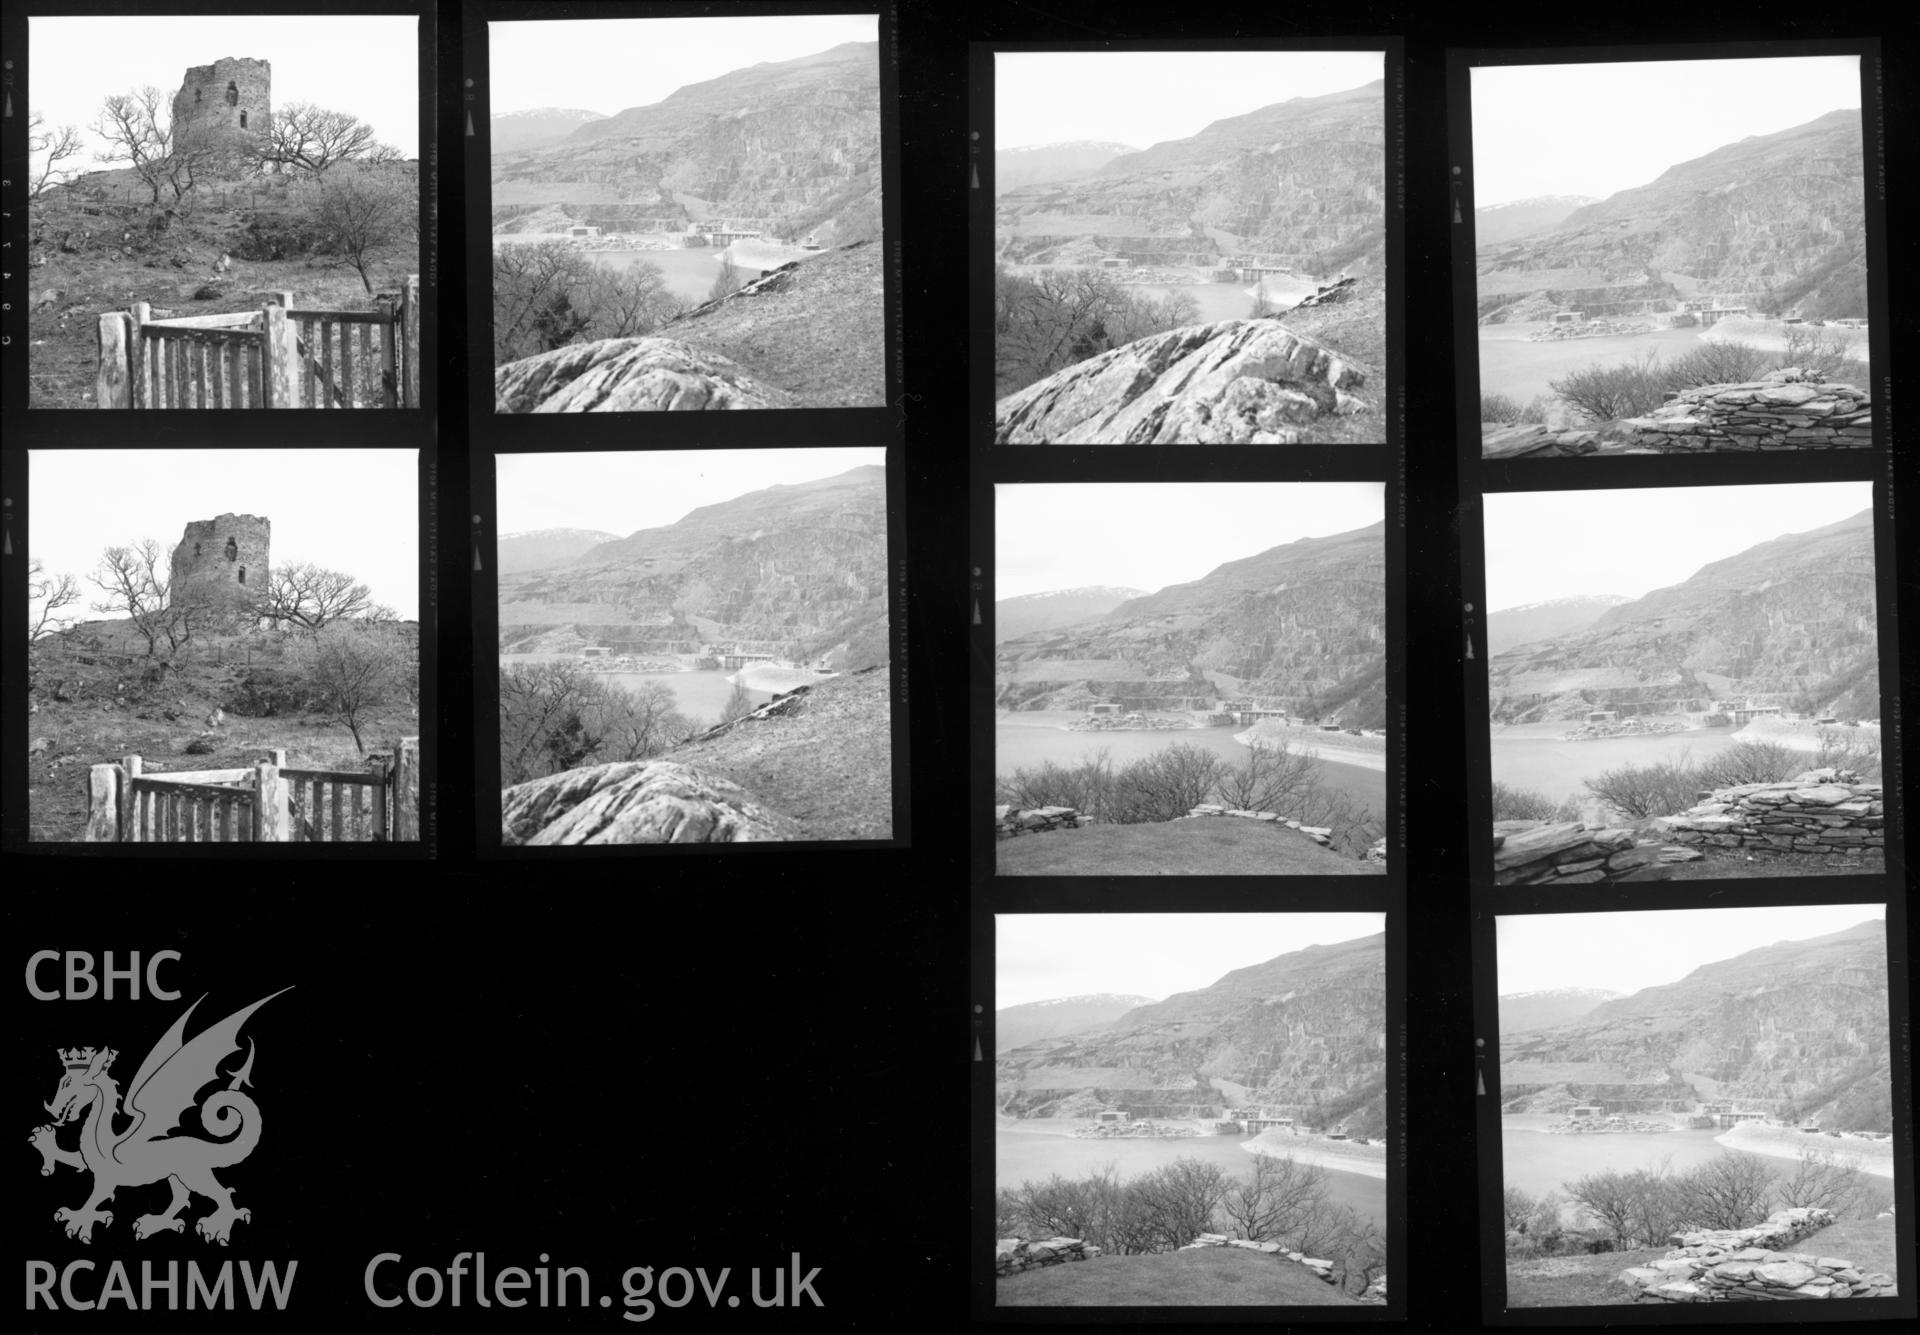 1 contact sheet of 10 b/w photographs showing landscape surrounding Dinorwig Power Station; collated by the former Central Office of Information.